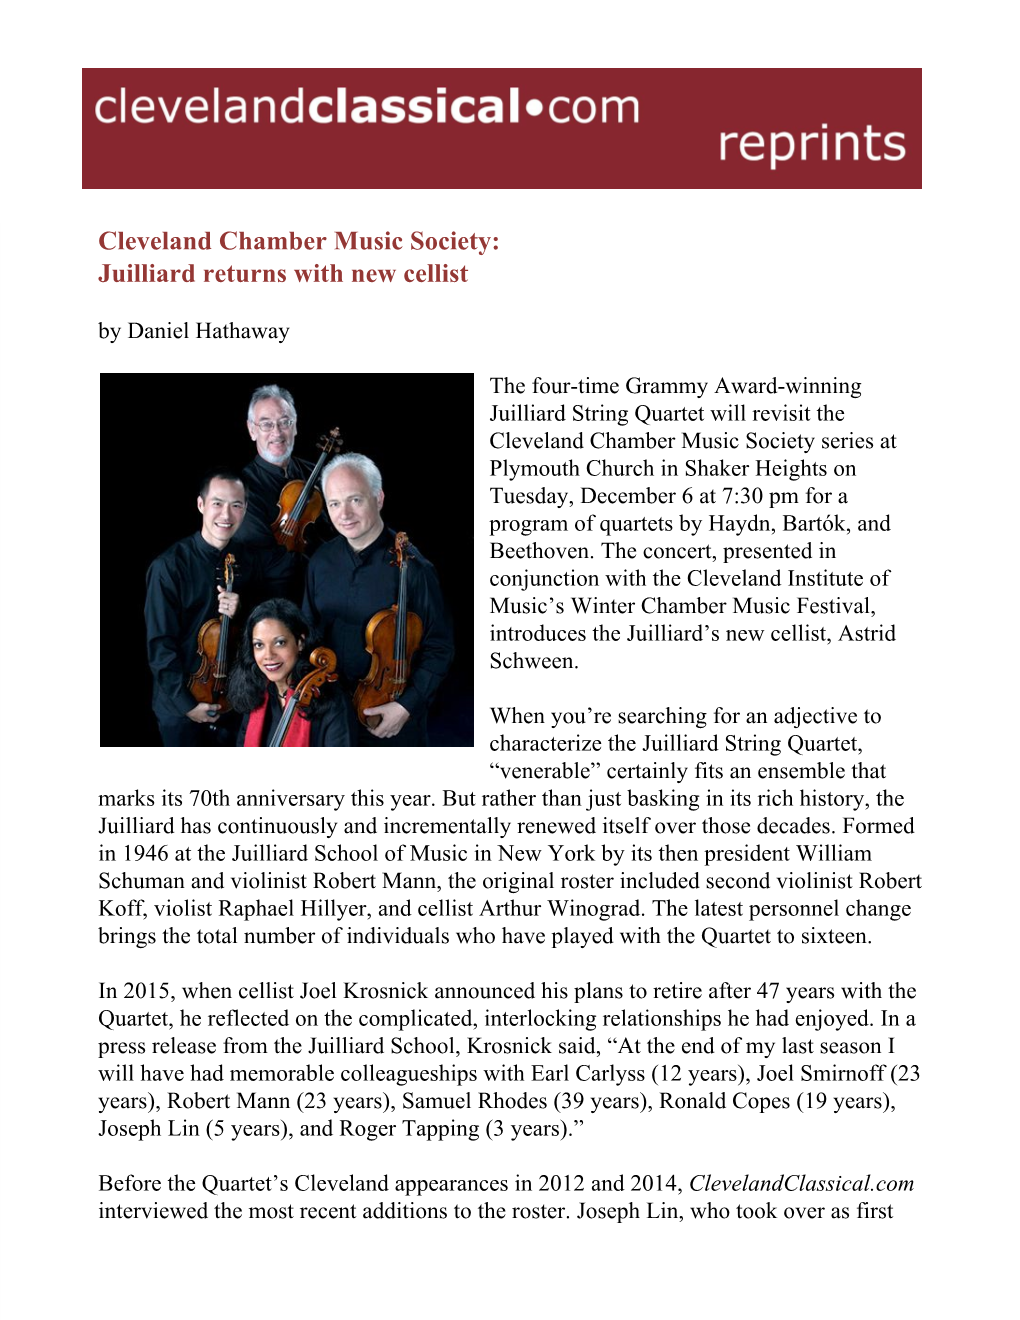 Cleveland Chamber Music Society: Juilliard Returns with New Cellist by Daniel Hathaway